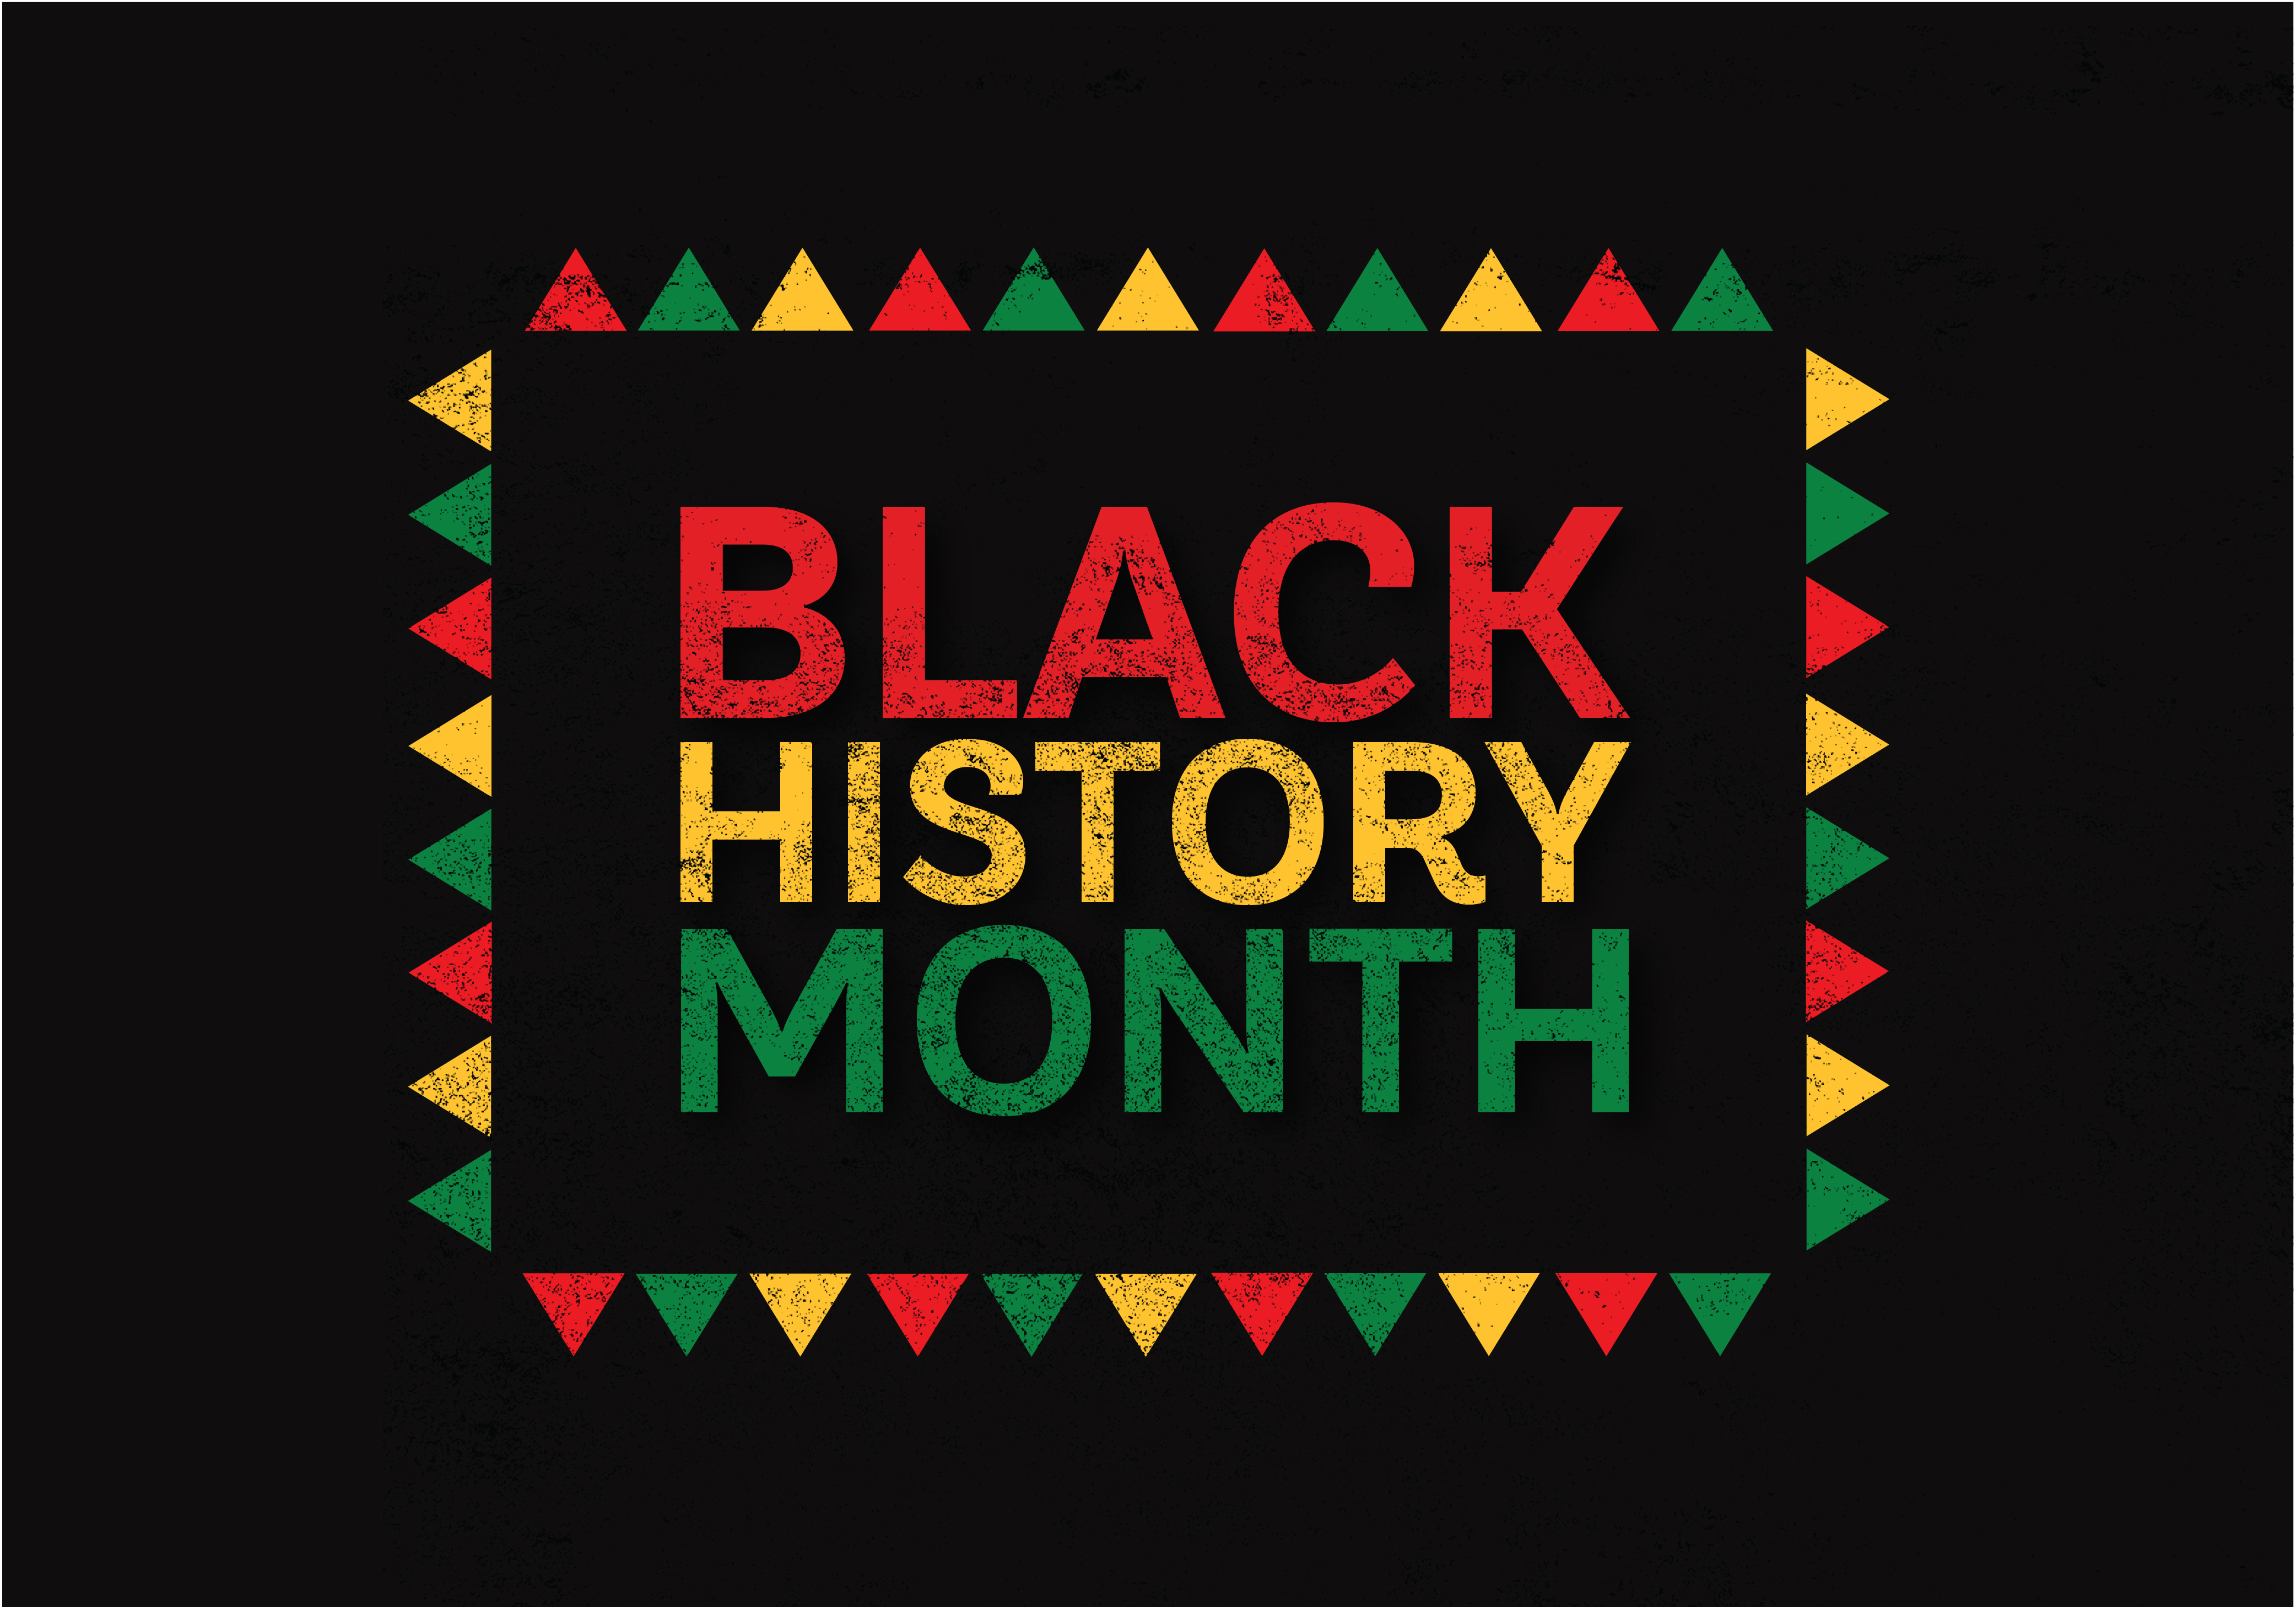 20-0115-Black History Month Social Graphic 700x1000px-01